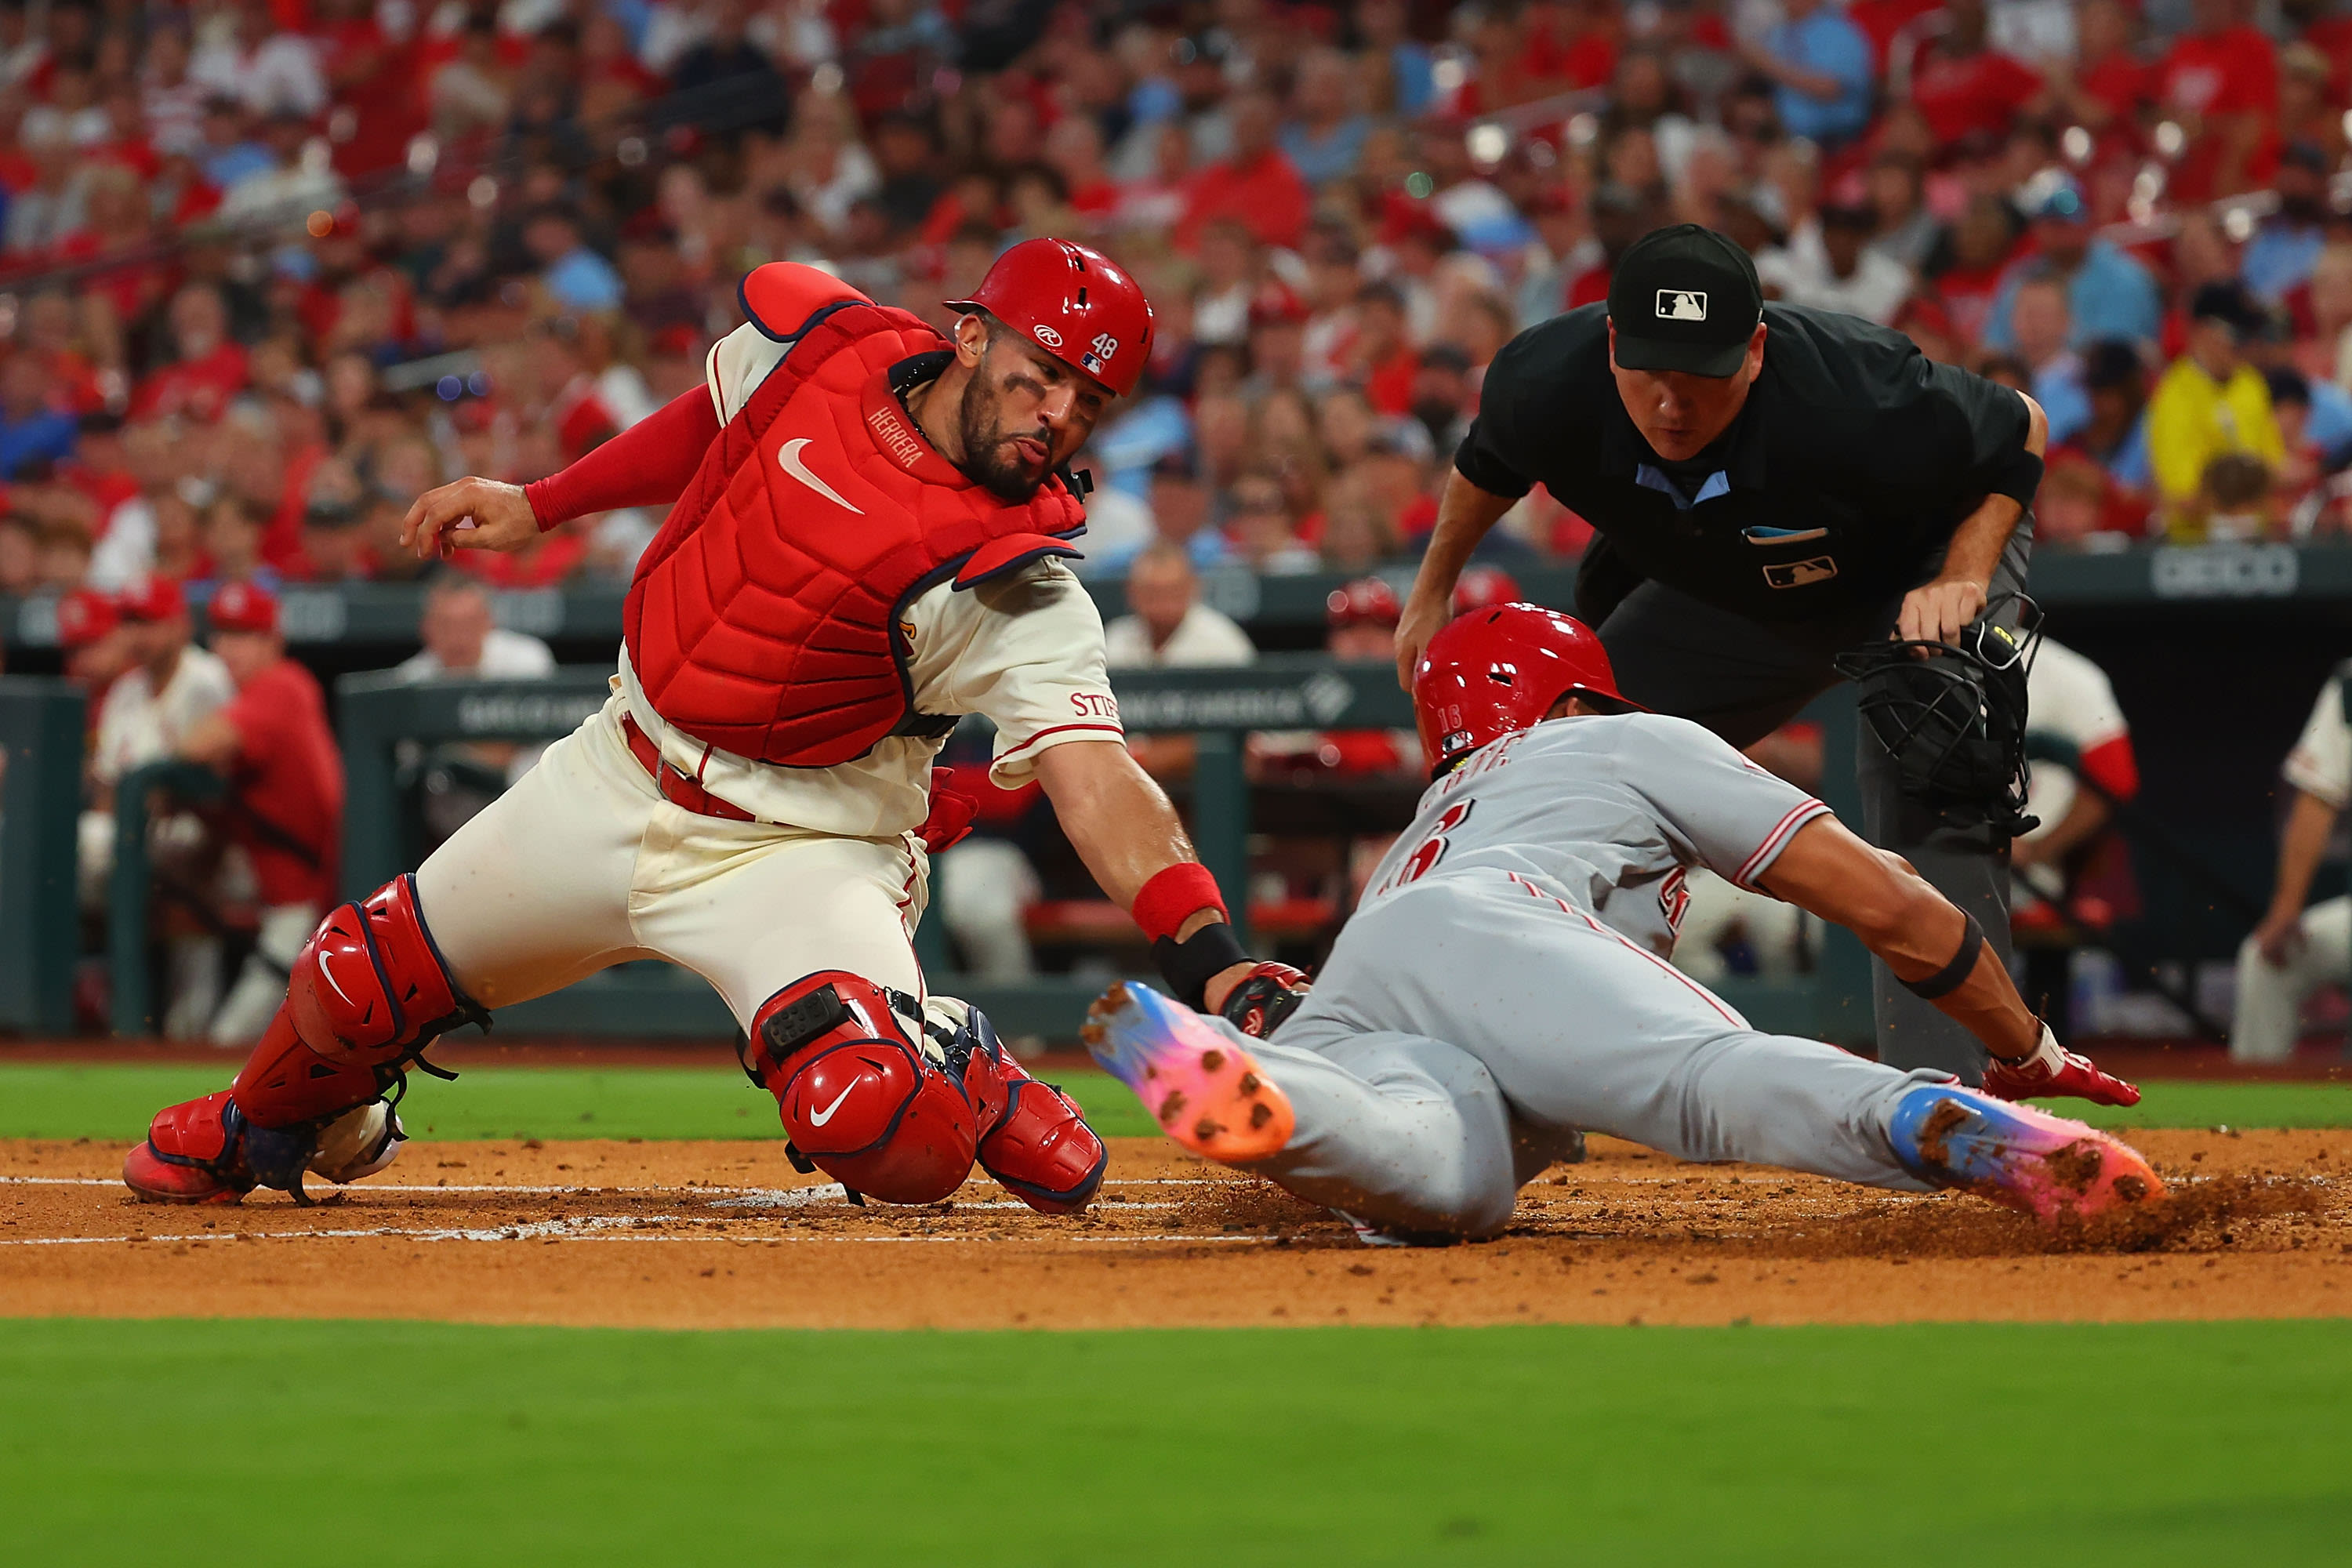 Cardinals Manager Oliver Marmol Says Defense Is Key for Catcher Ivan Herrera